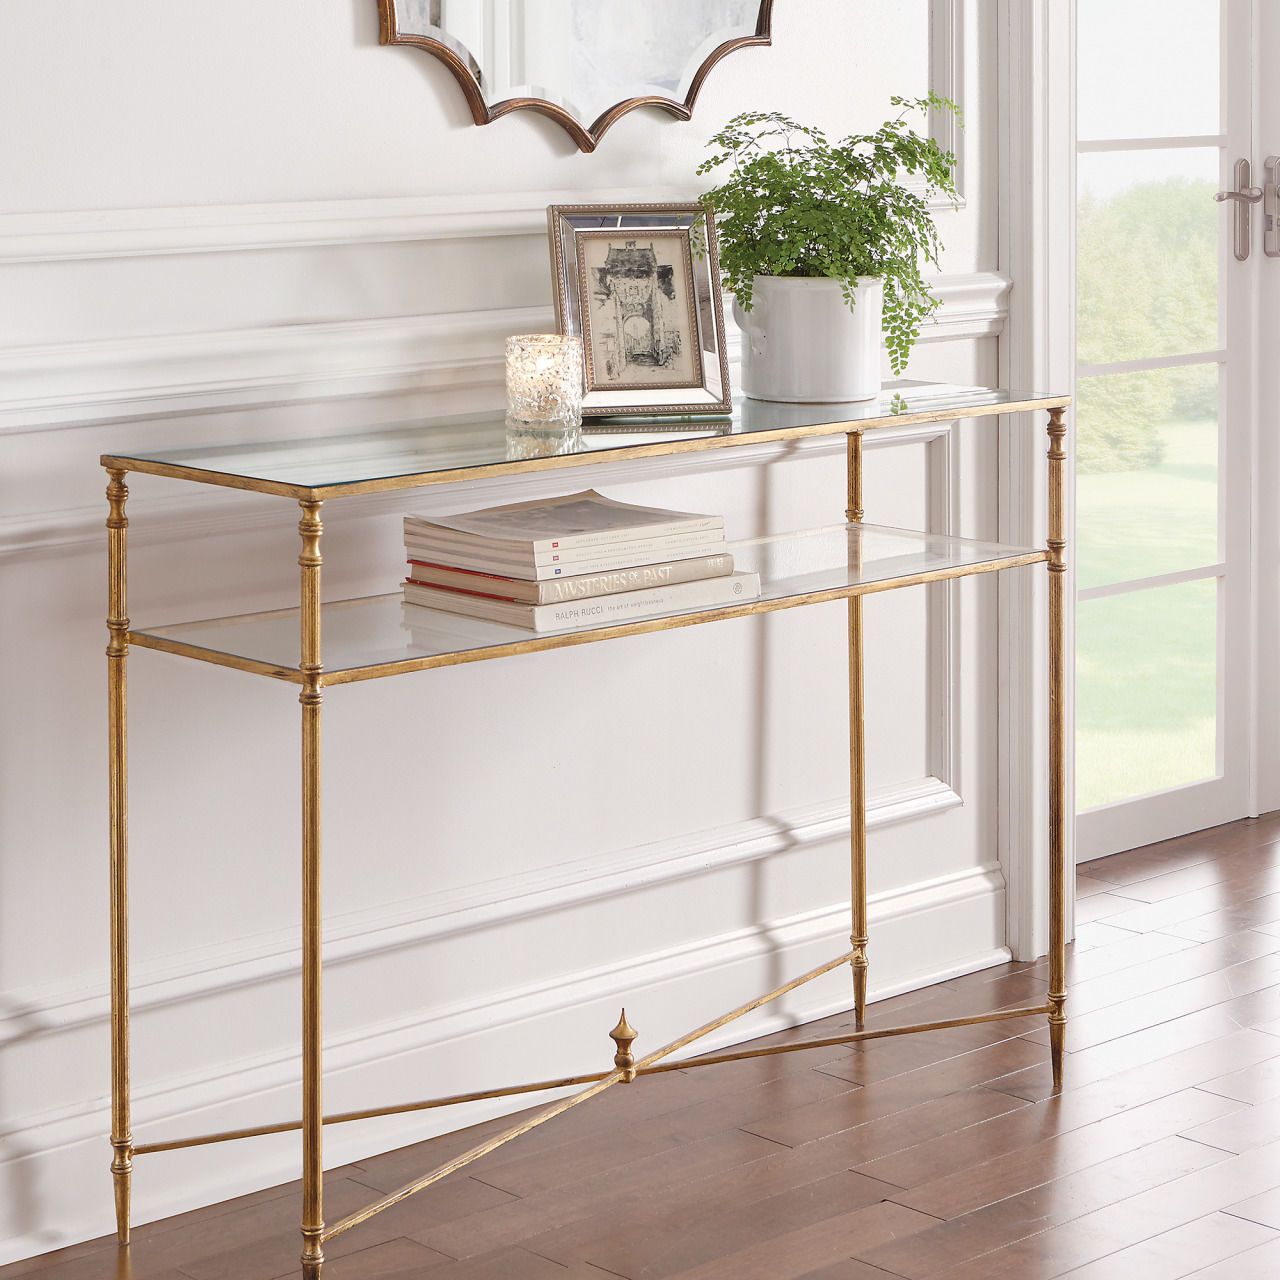 Horchow Sofa Console Table Hollywood Regency Antique Gold & Glass With Regard To Gold Console Tables (View 4 of 20)